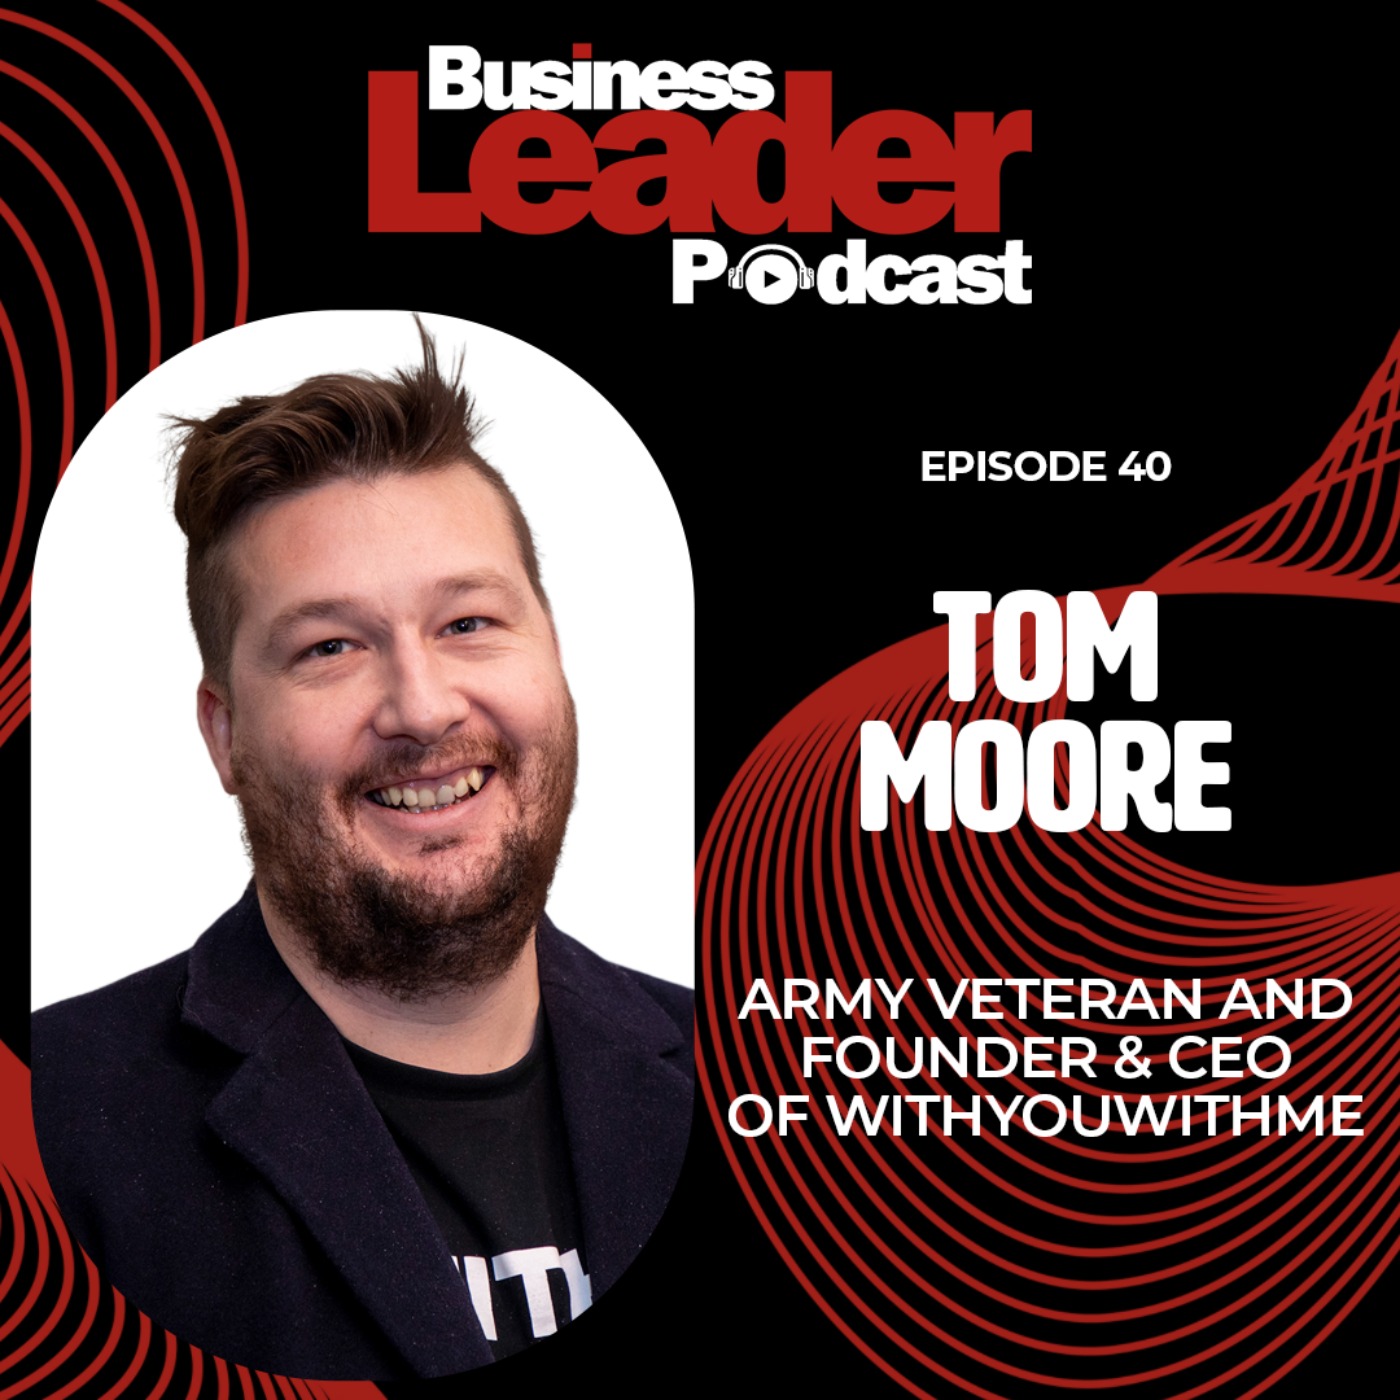 Tom Moore: Using military experience to empower customers and build a unicorn